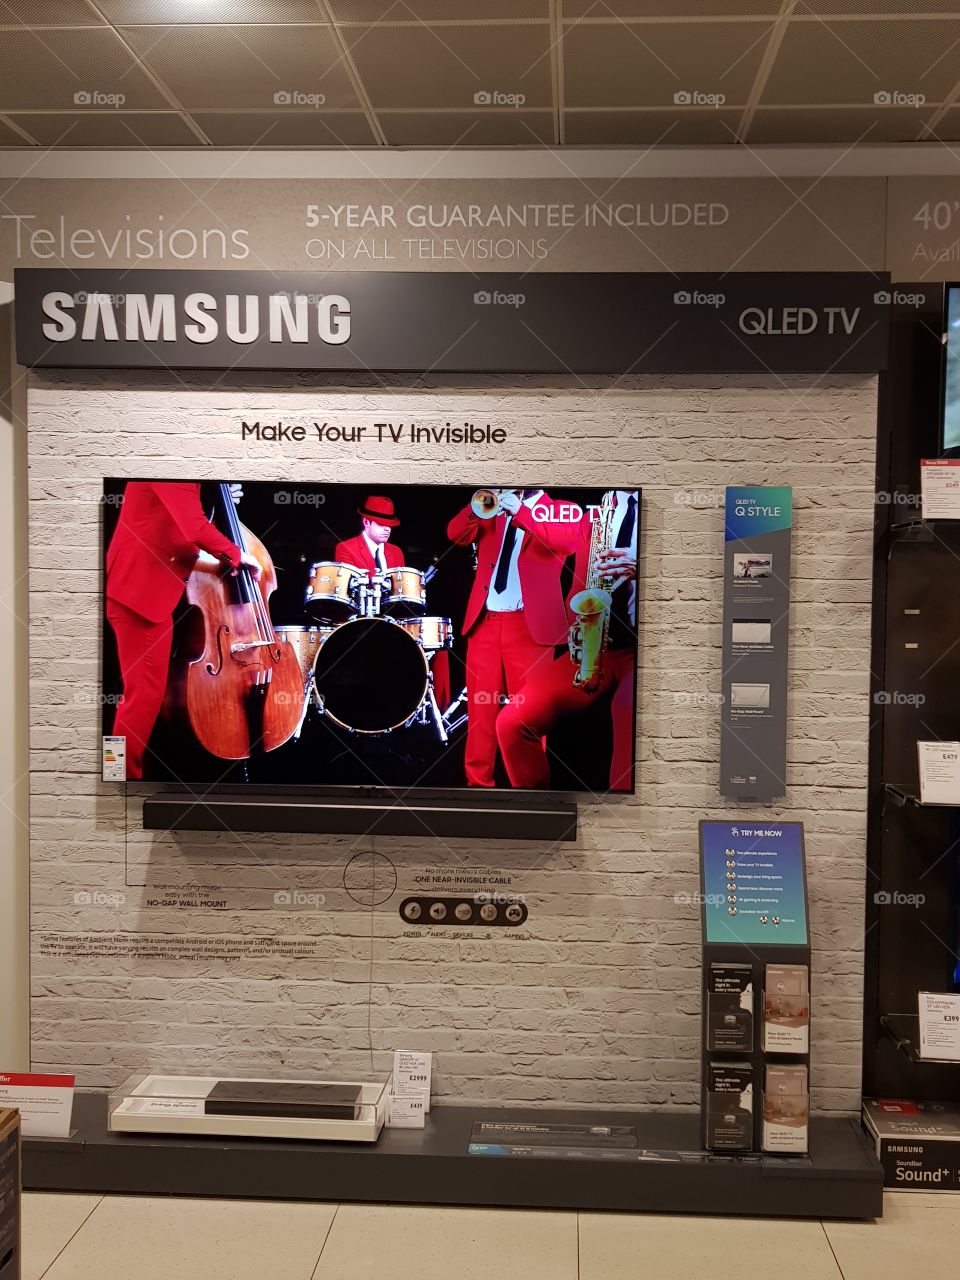 Samsung QLED ambient mode television wall mounted televisions 4K Ultra High Definition TV with soundbar at Peter Jones department store Sloane square Chelsea Kings road London